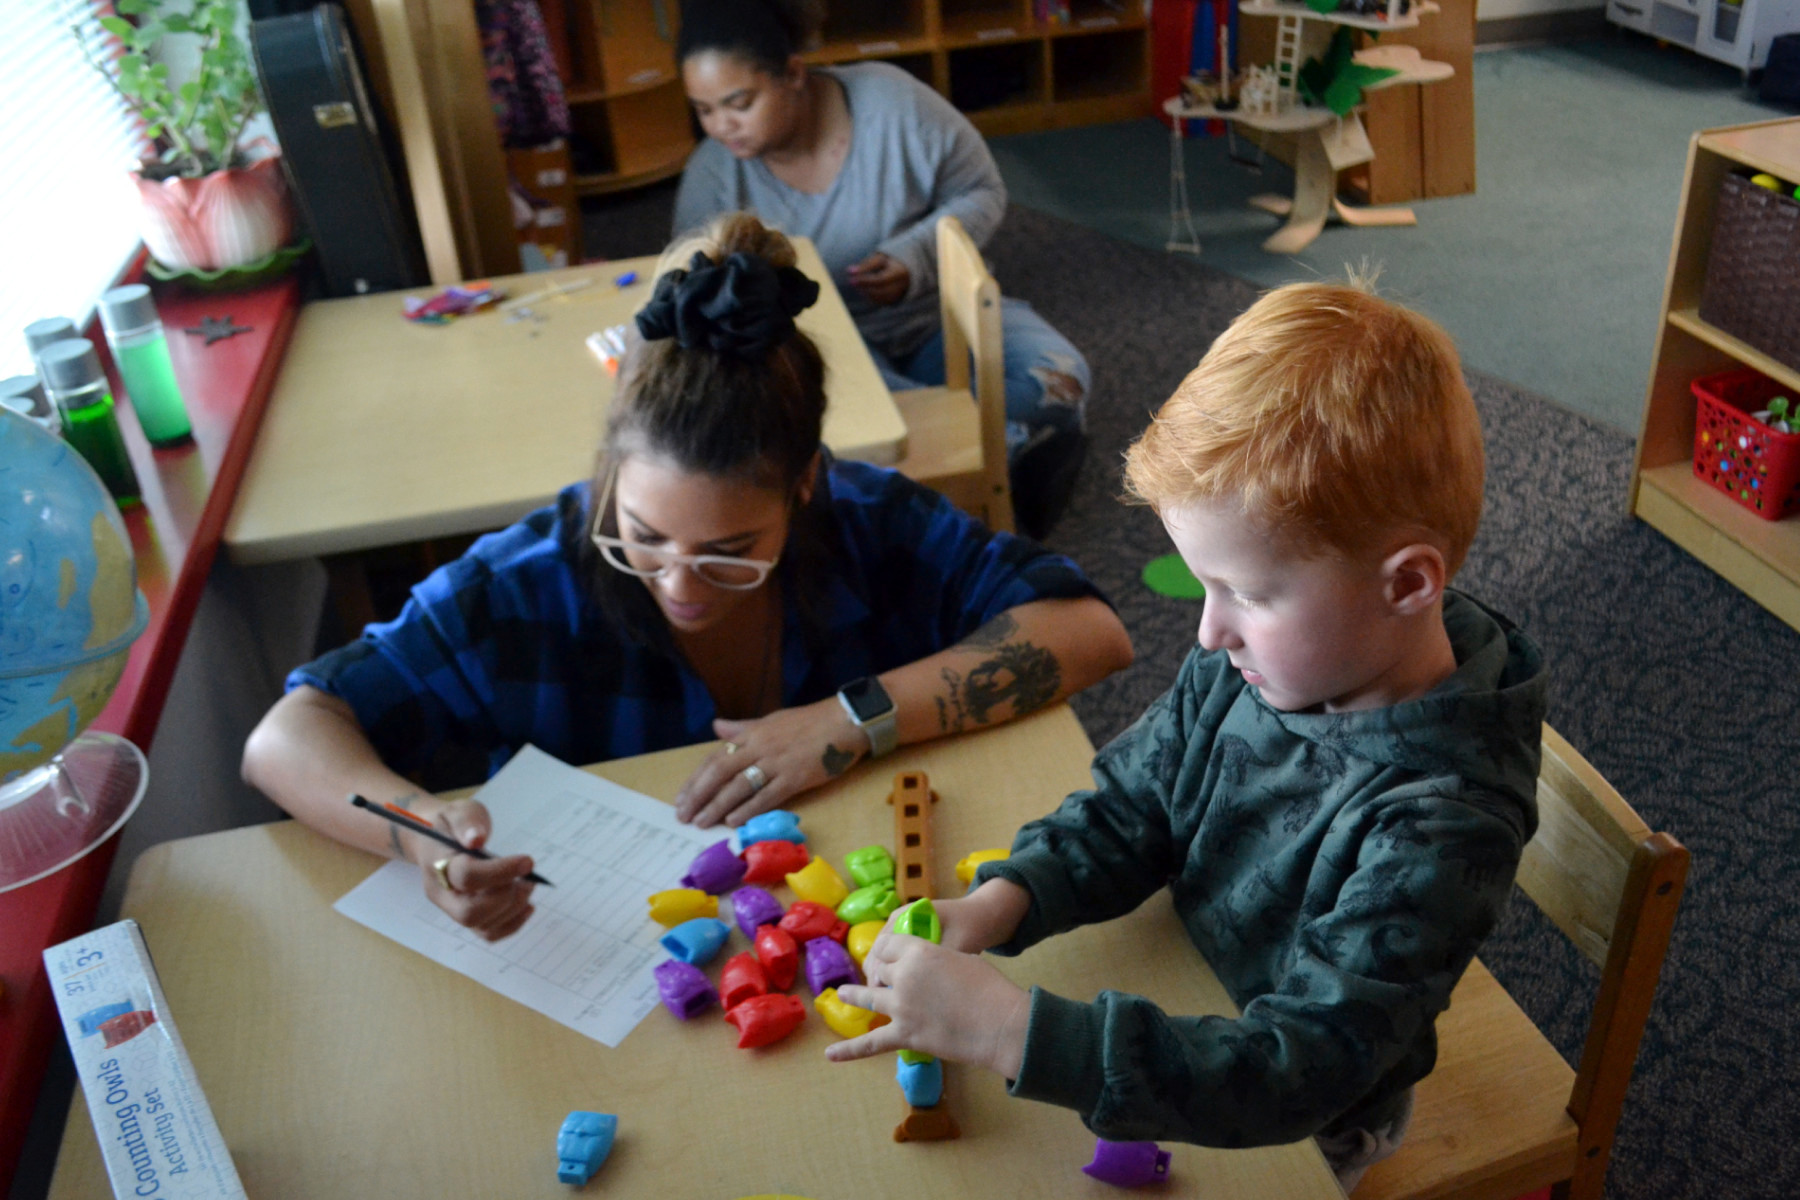 Emylie Montalvo and child seated at table counting owl toys